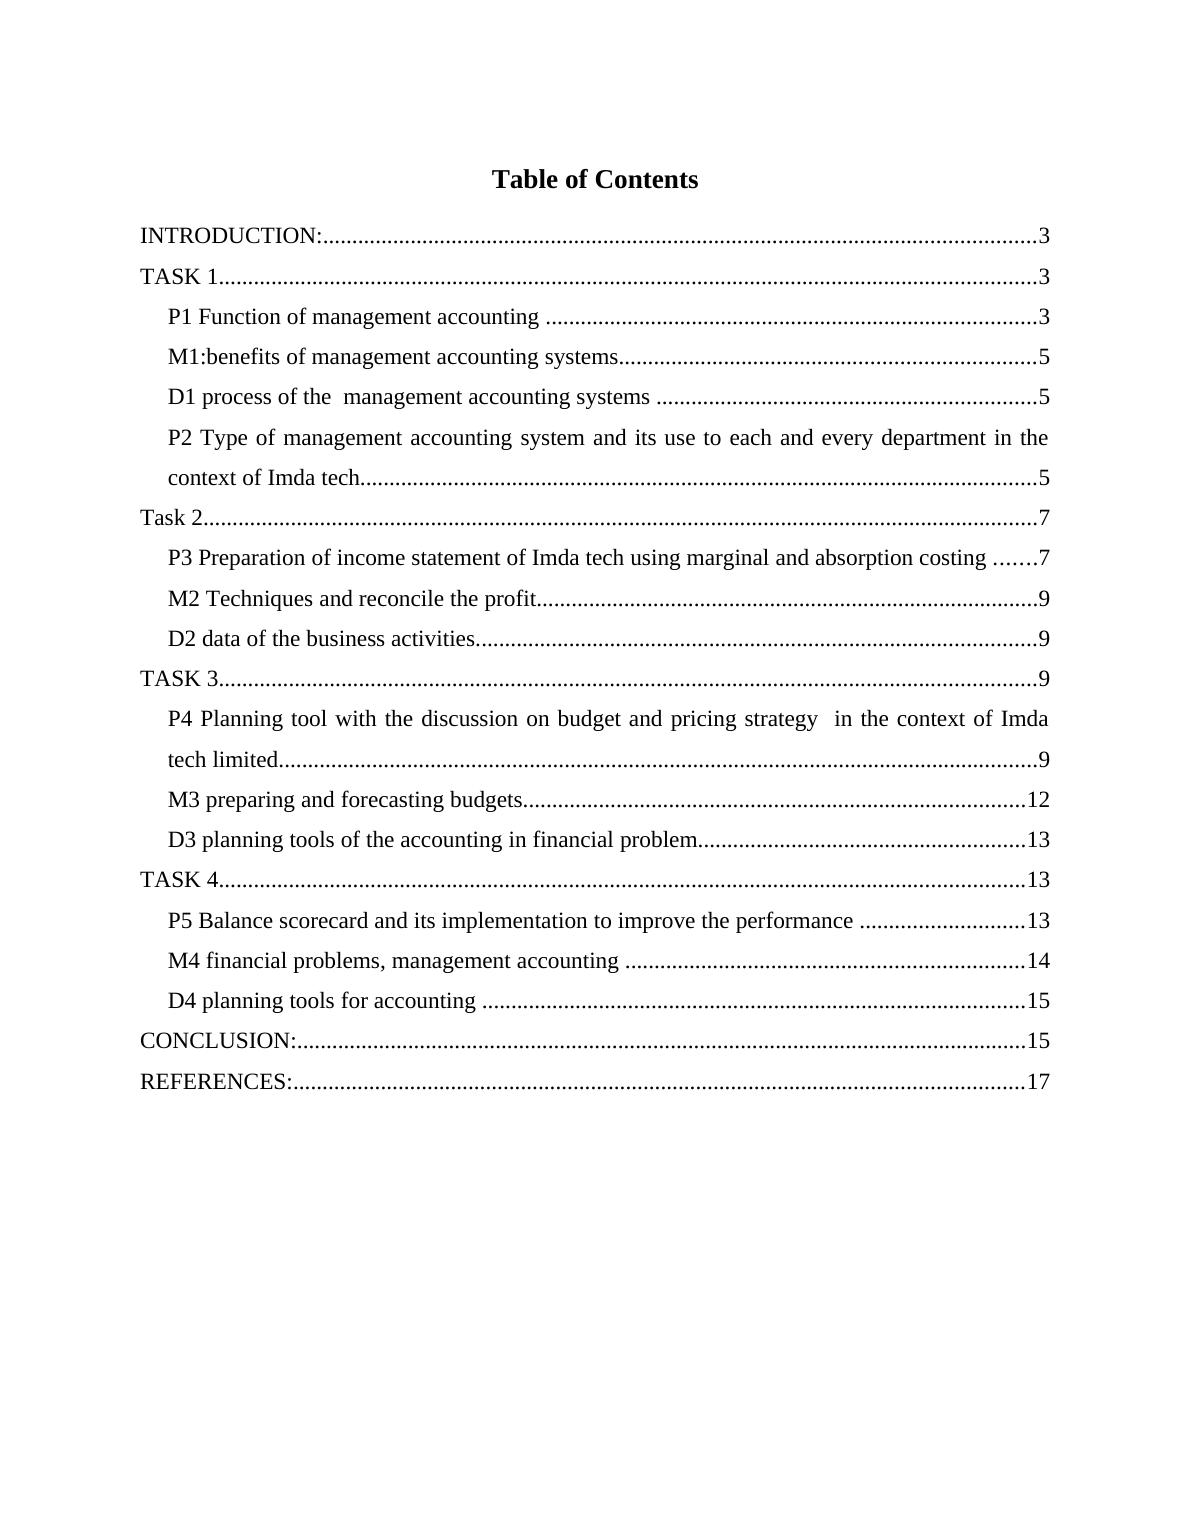 UNIT 2 Assignment on Management Accounting_2